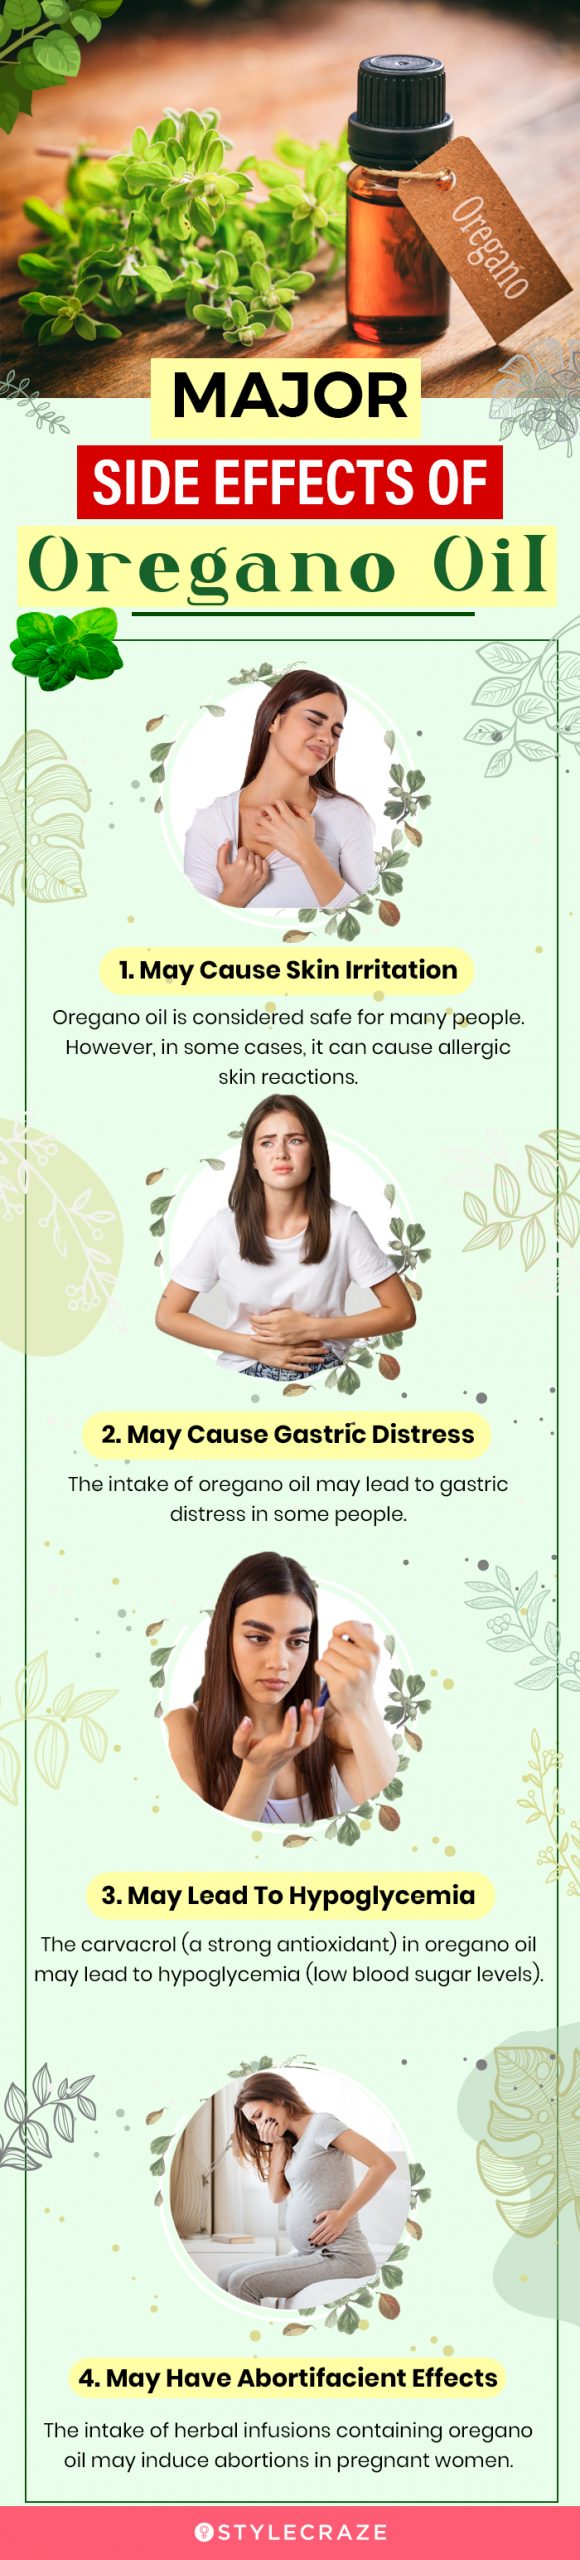 major side effects of oregano oil (infographic)